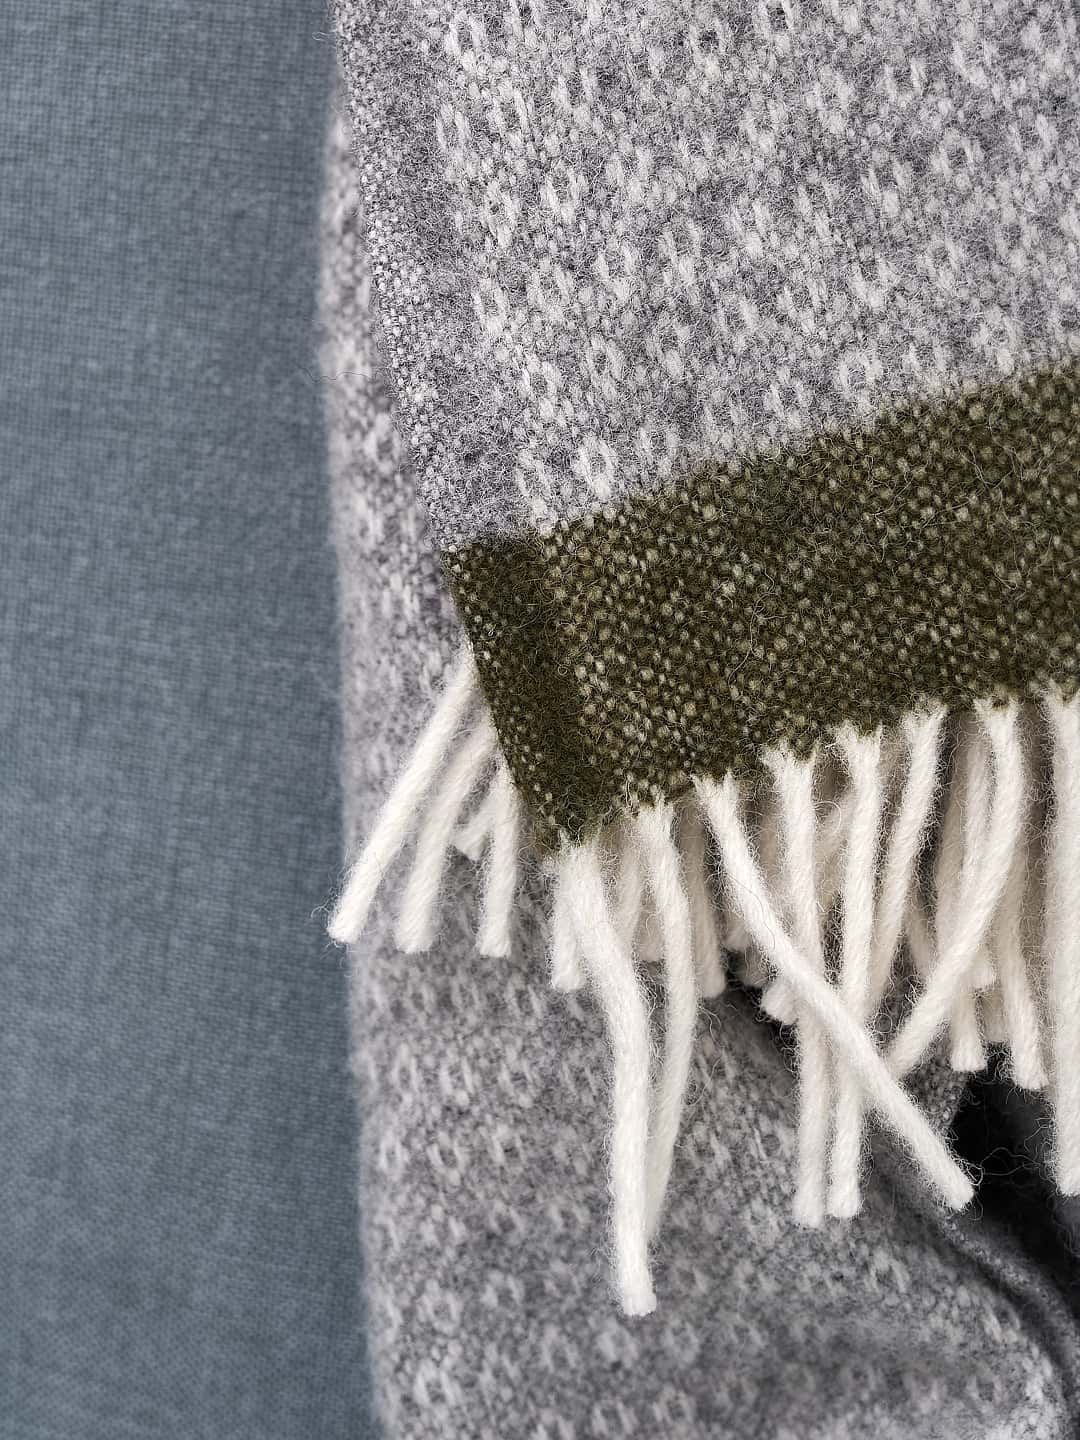 A close up of a Klippan Hampus Wool Throw – Grey Green blanket with fringes.